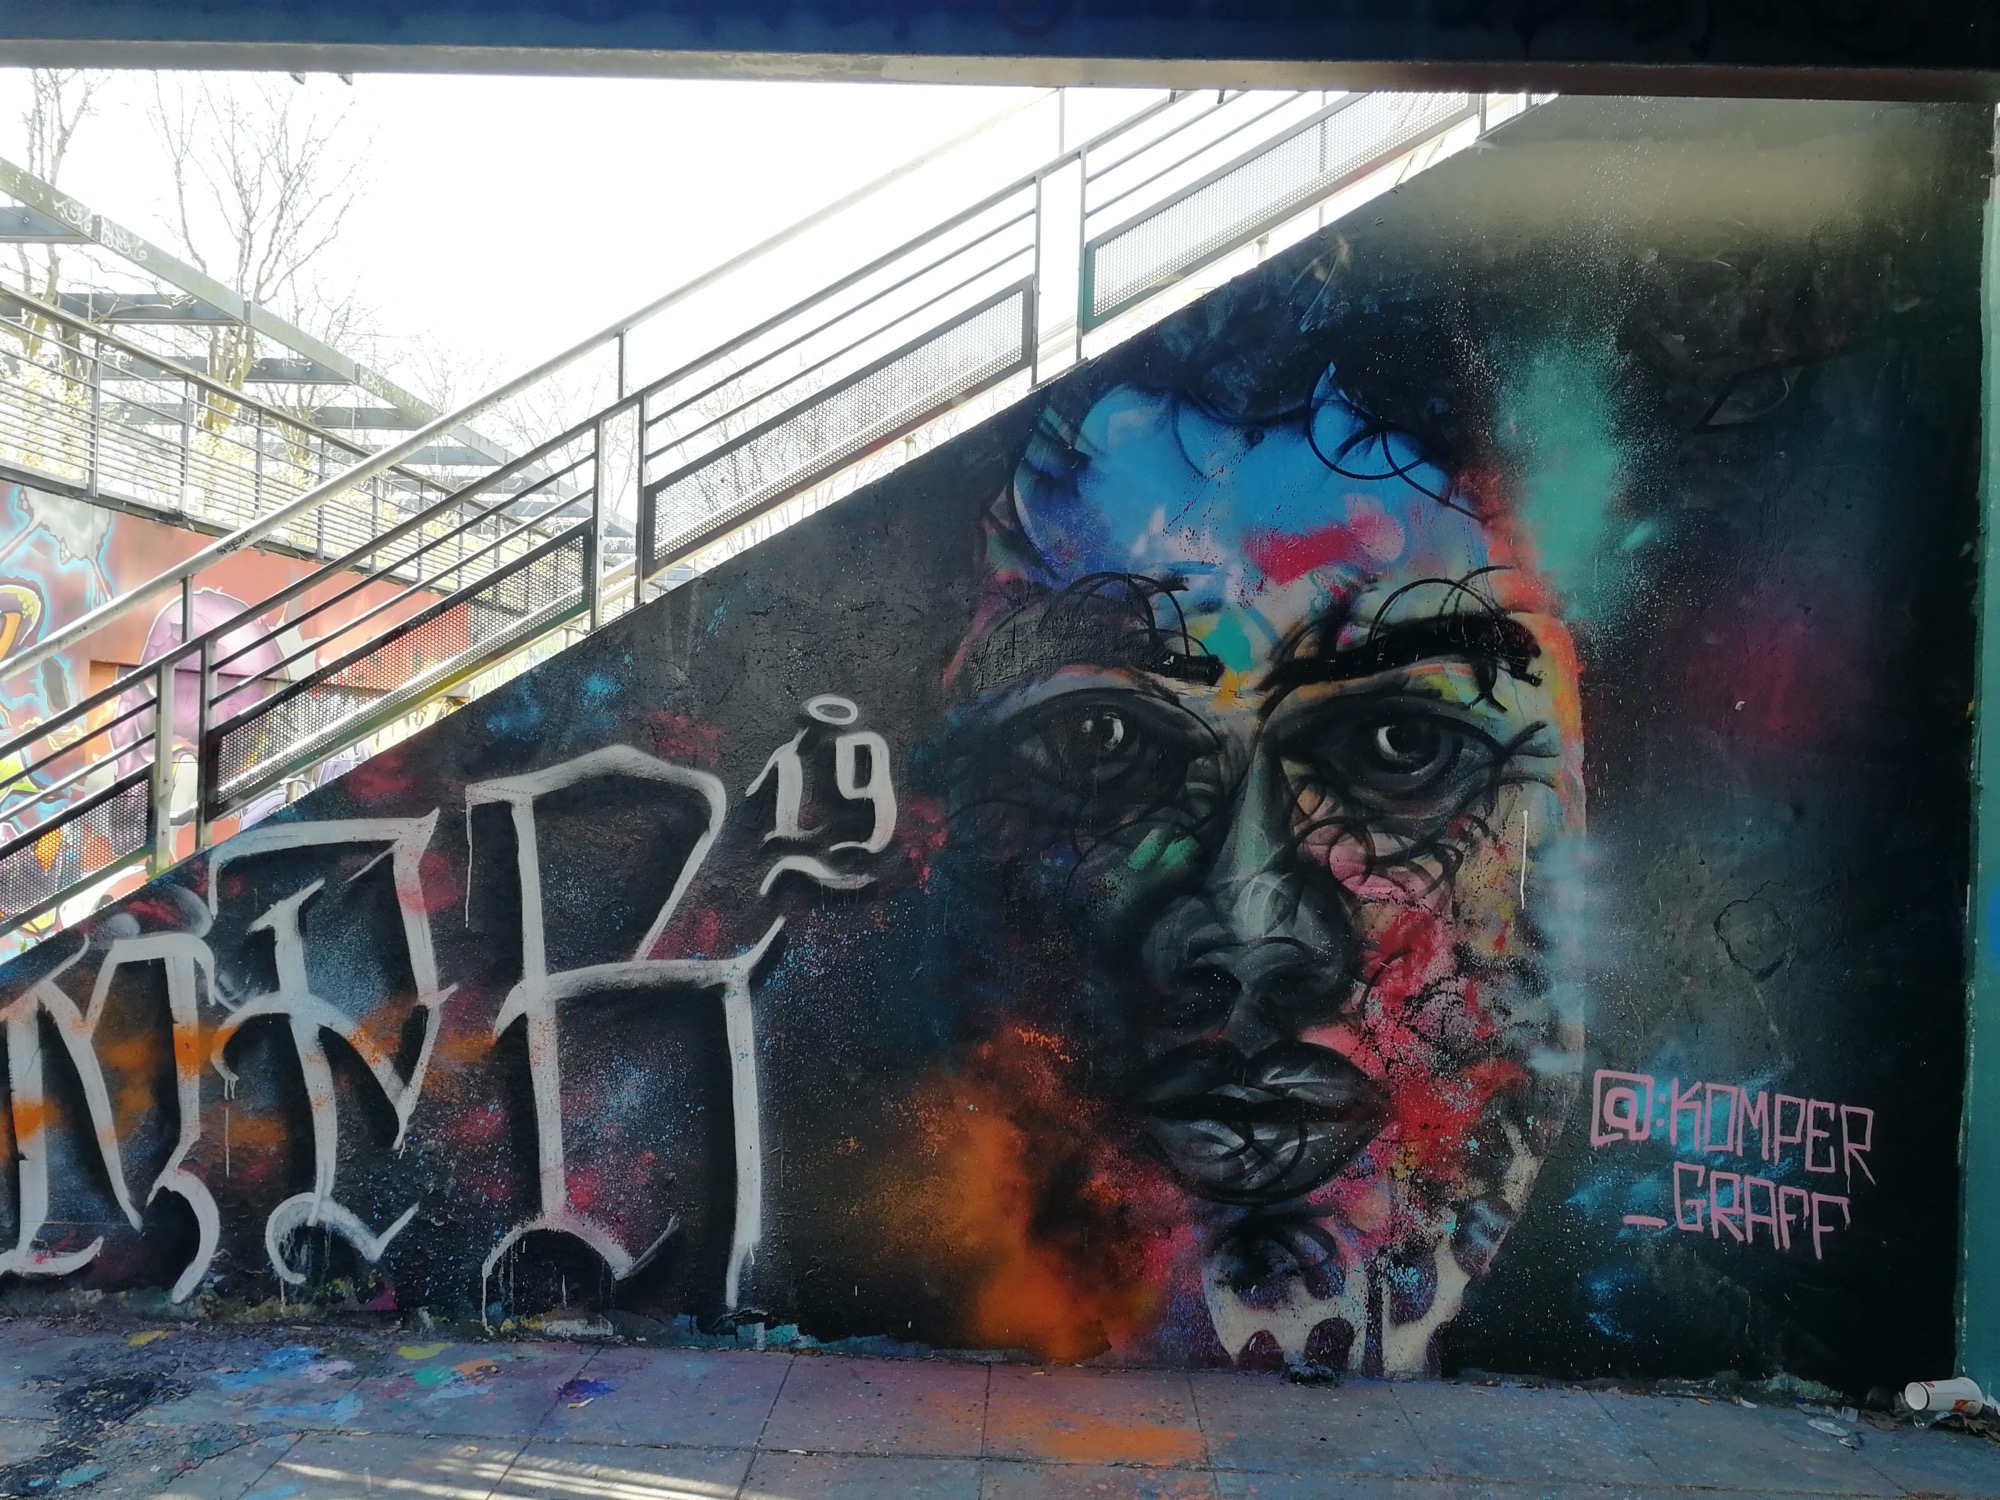 Graffiti 1483  by the artist Komper captured by Rabot in Angers France